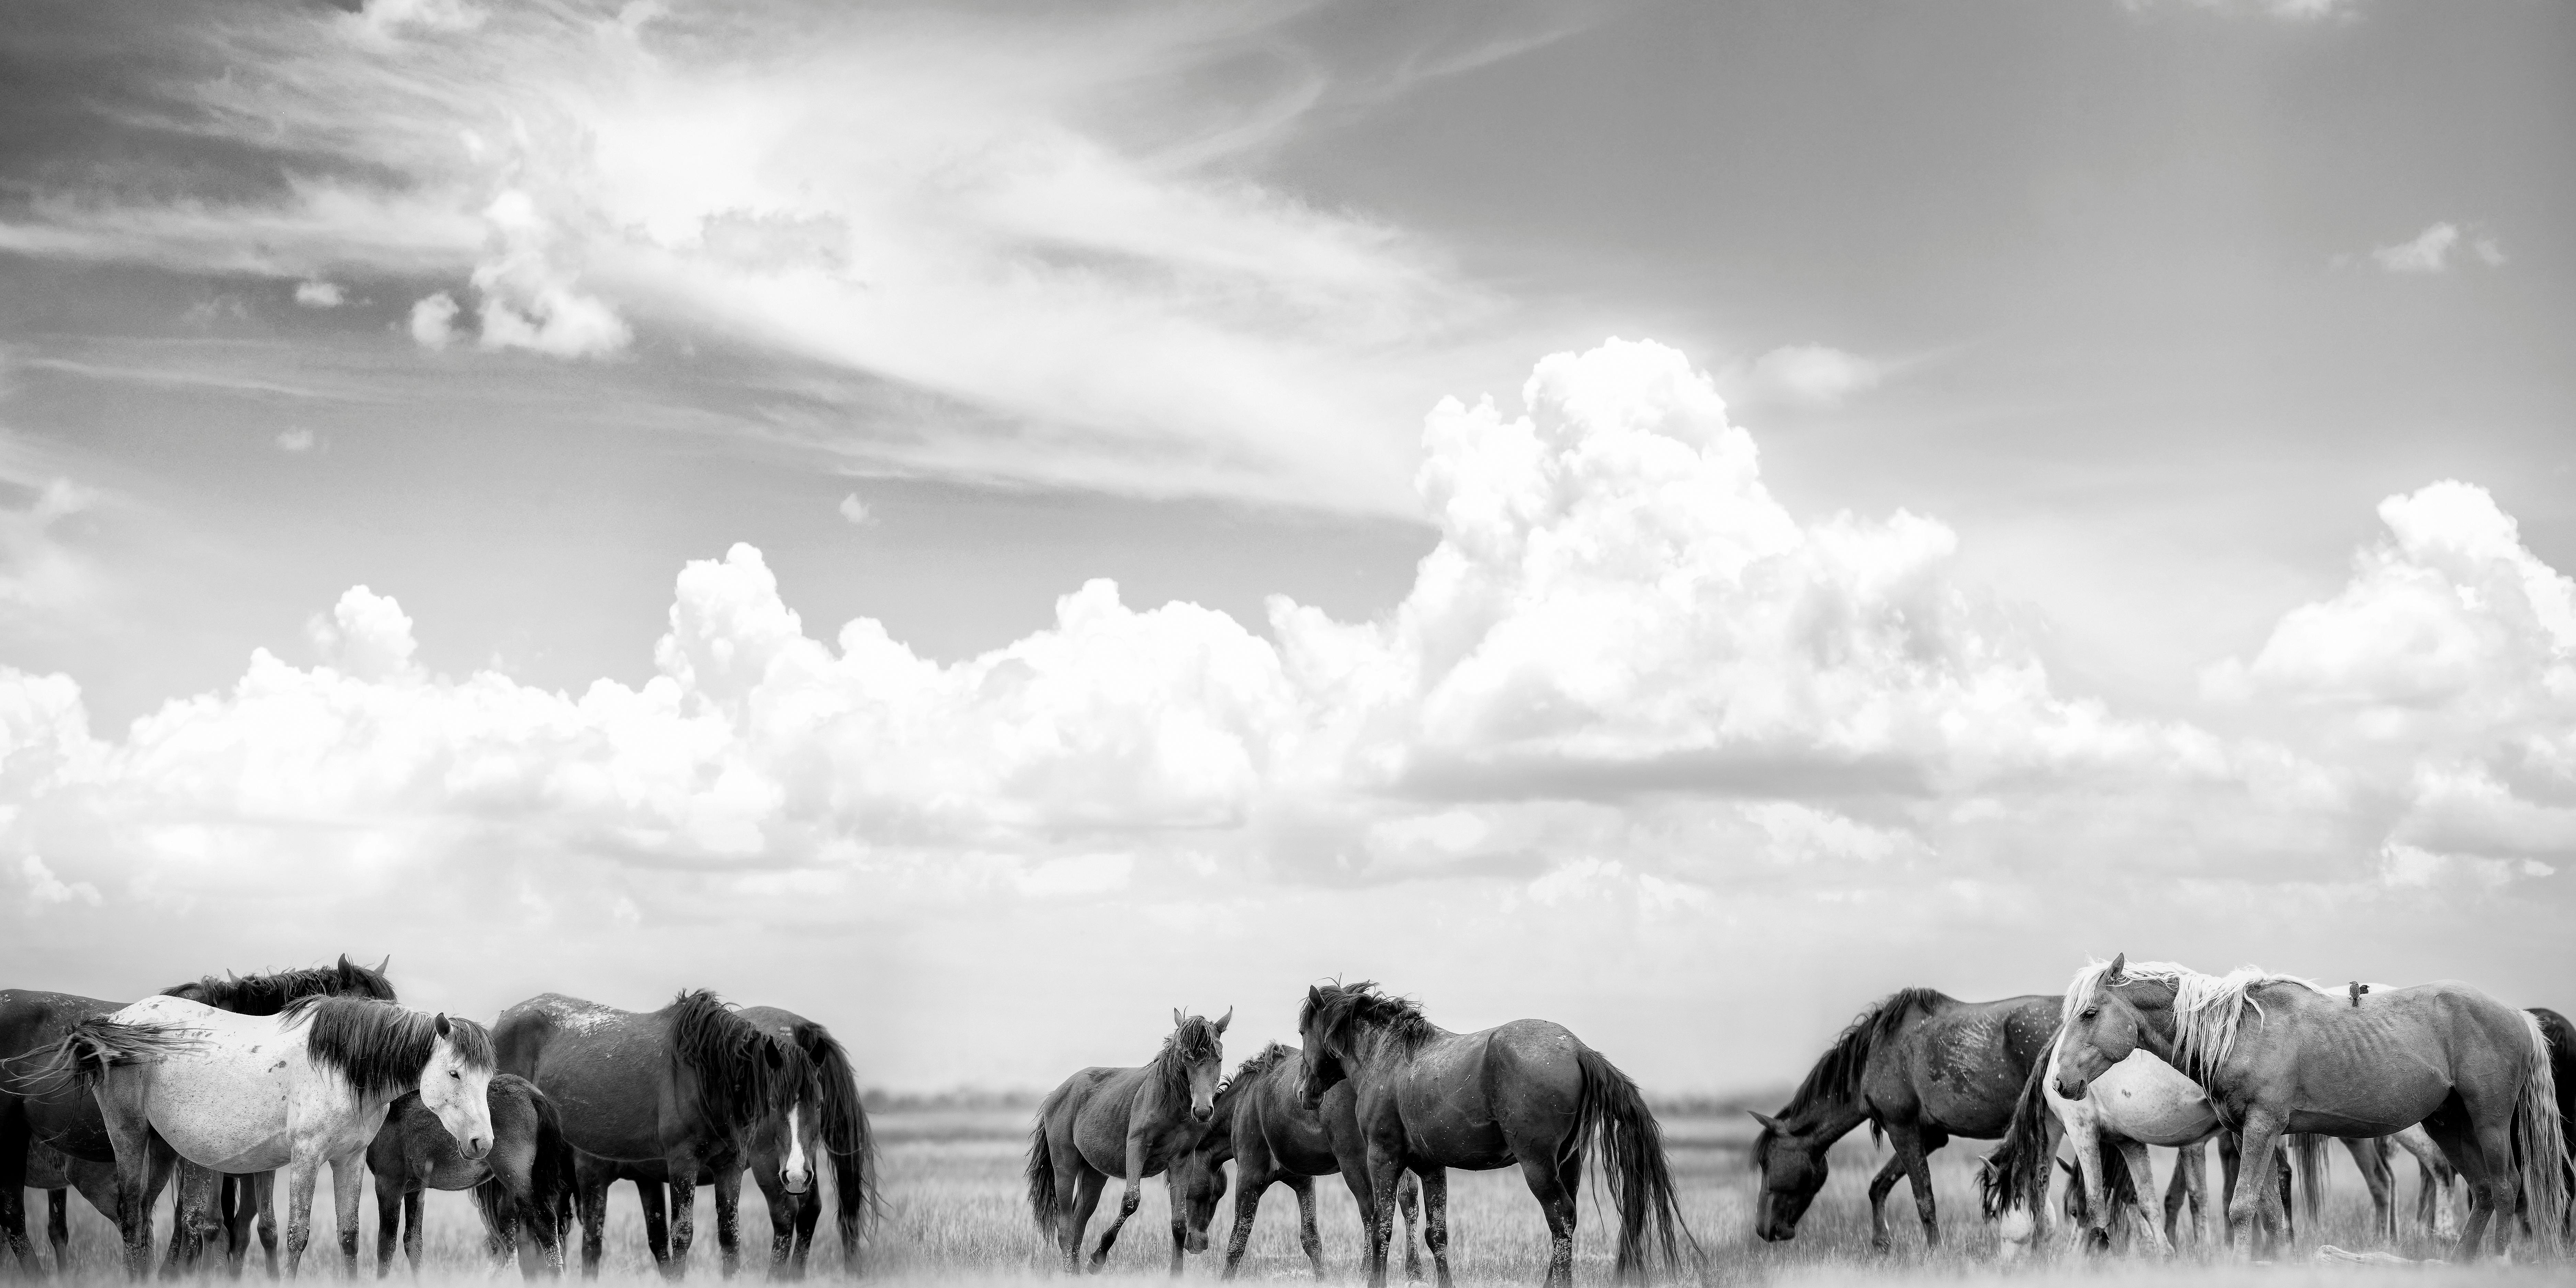 Shane Russeck Animal Print - "On Any Sun" 100x48 - Black & White Photography, Wild Horses, Mustangs